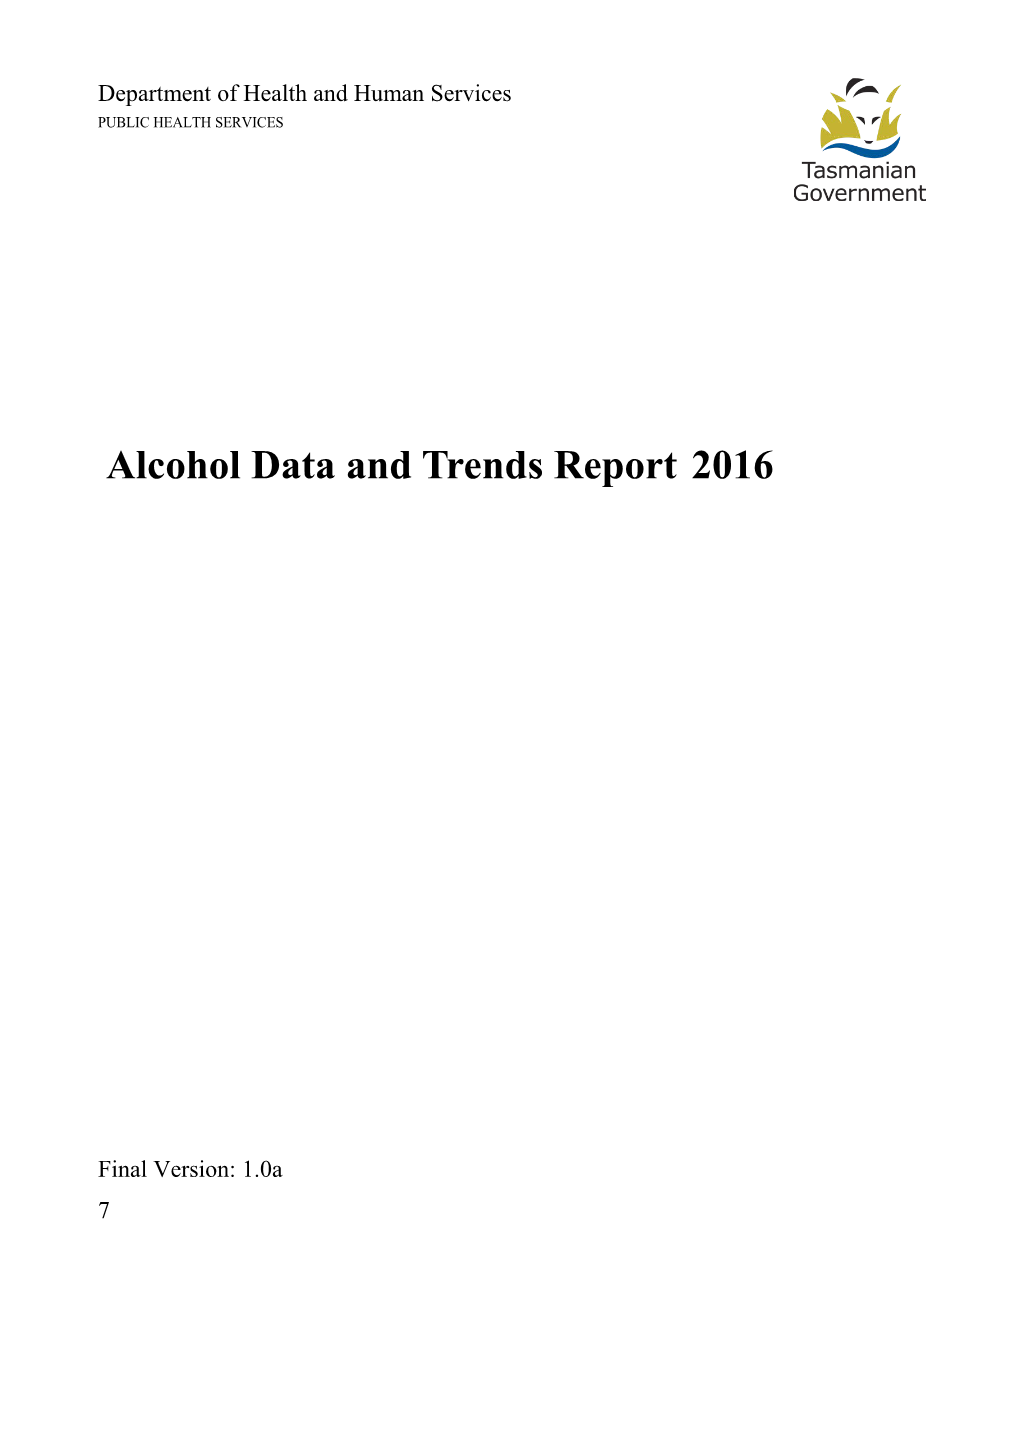 Tasmanian Alcohol Data and Trends Report 2016